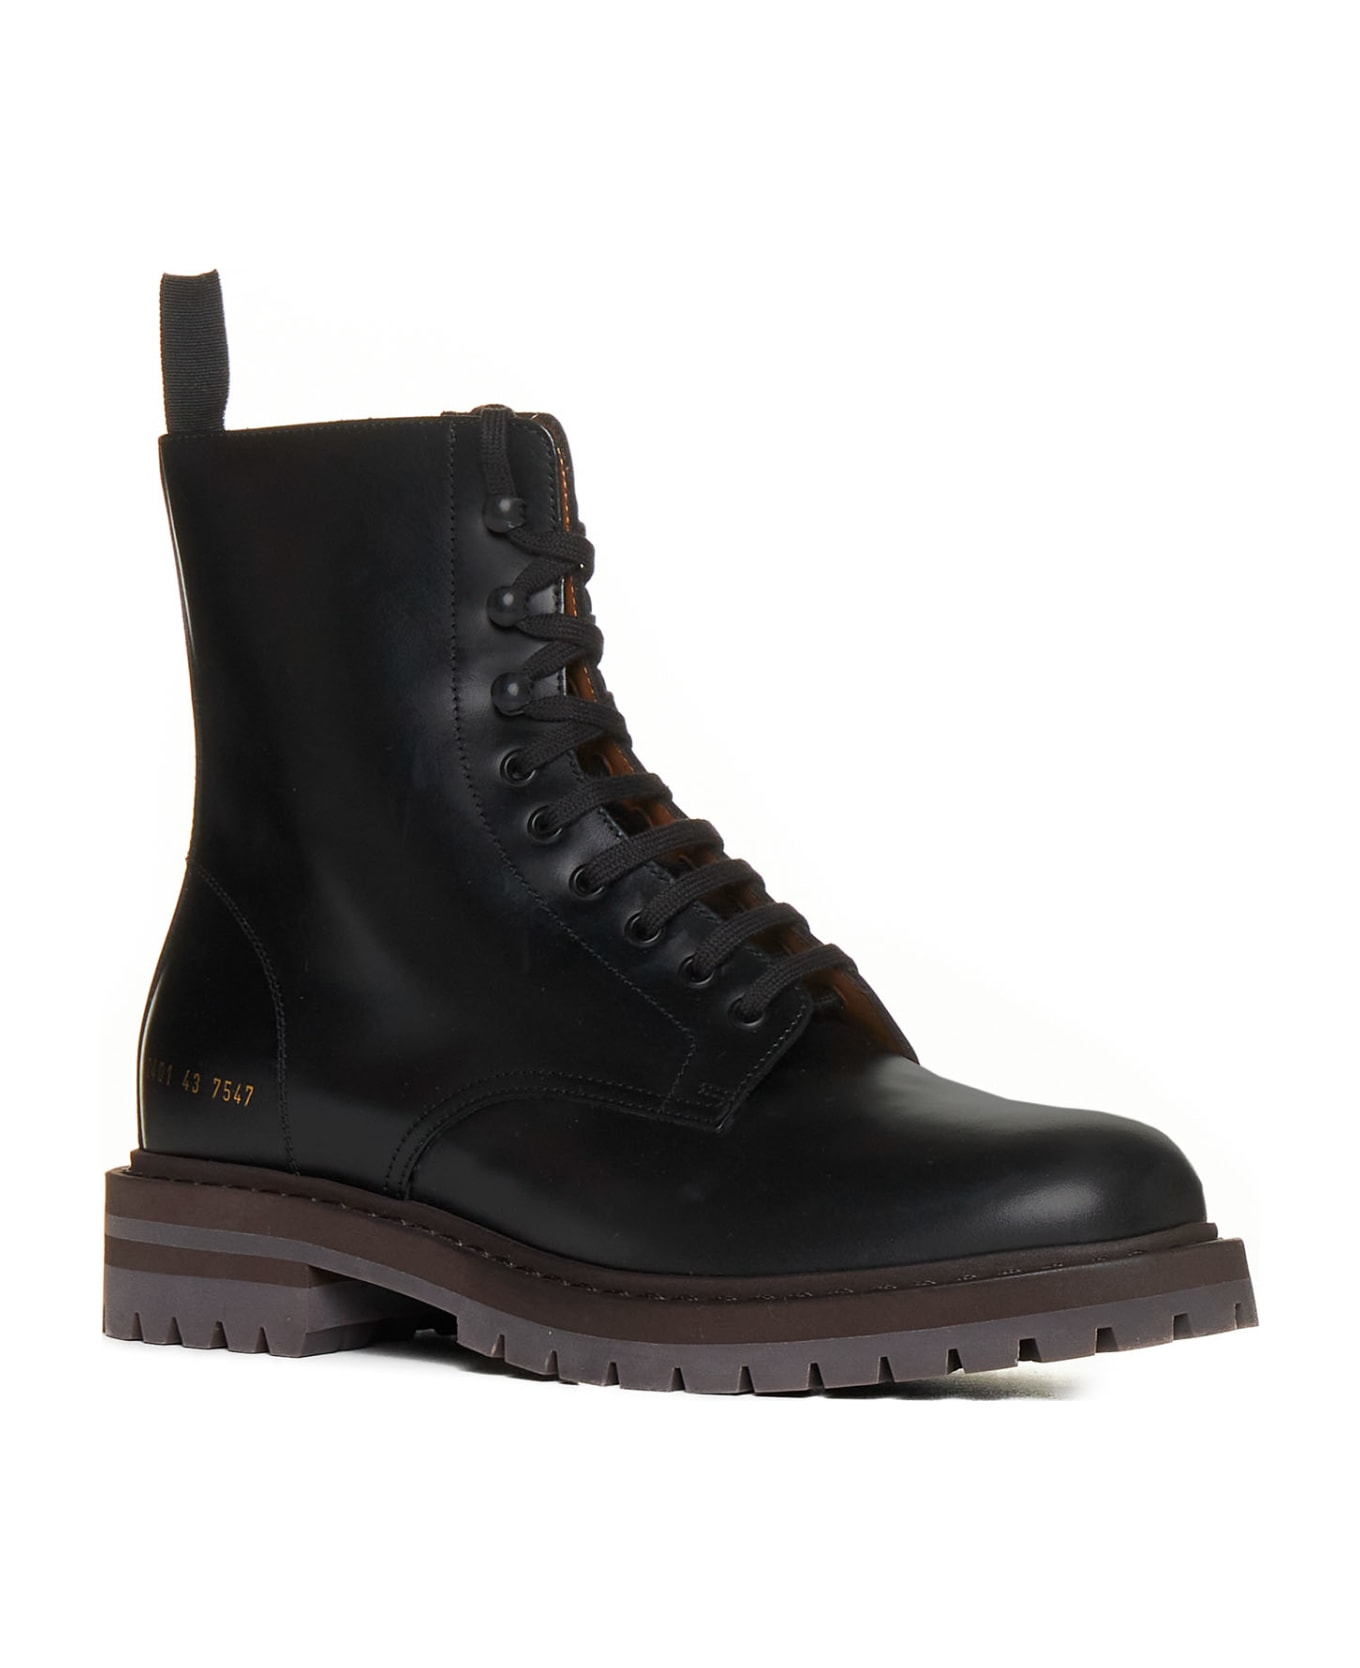 Common Projects Leather Derby Boots - Black